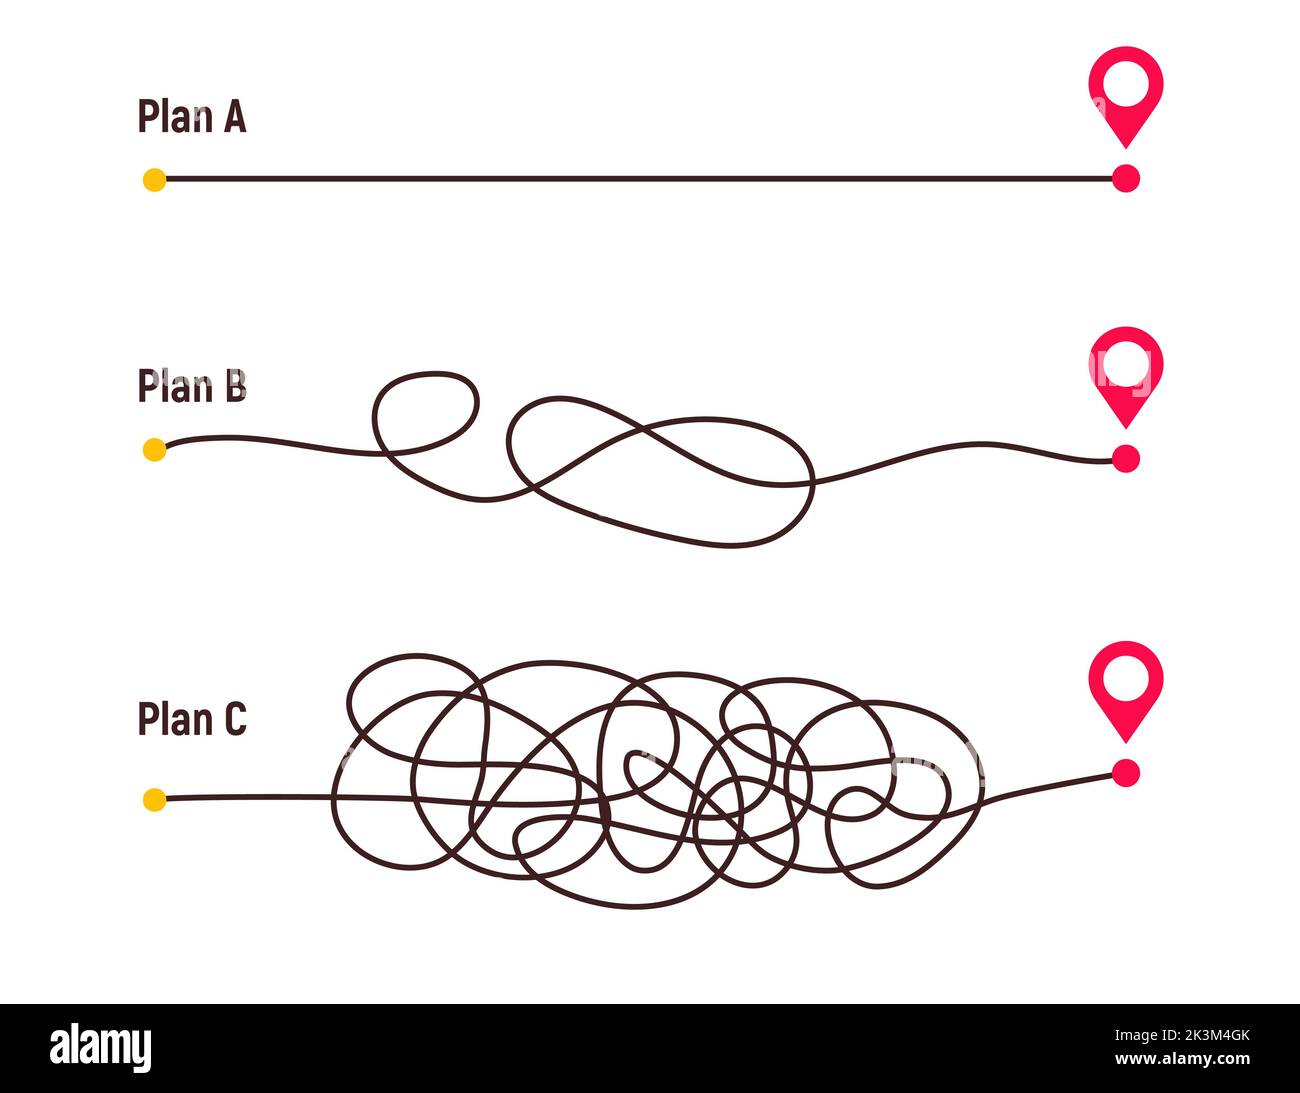 Complicated way and simple path from point A to B. Plans and real life chaos simplifying. Curved dashed line. Vector illustration. Stock Vector